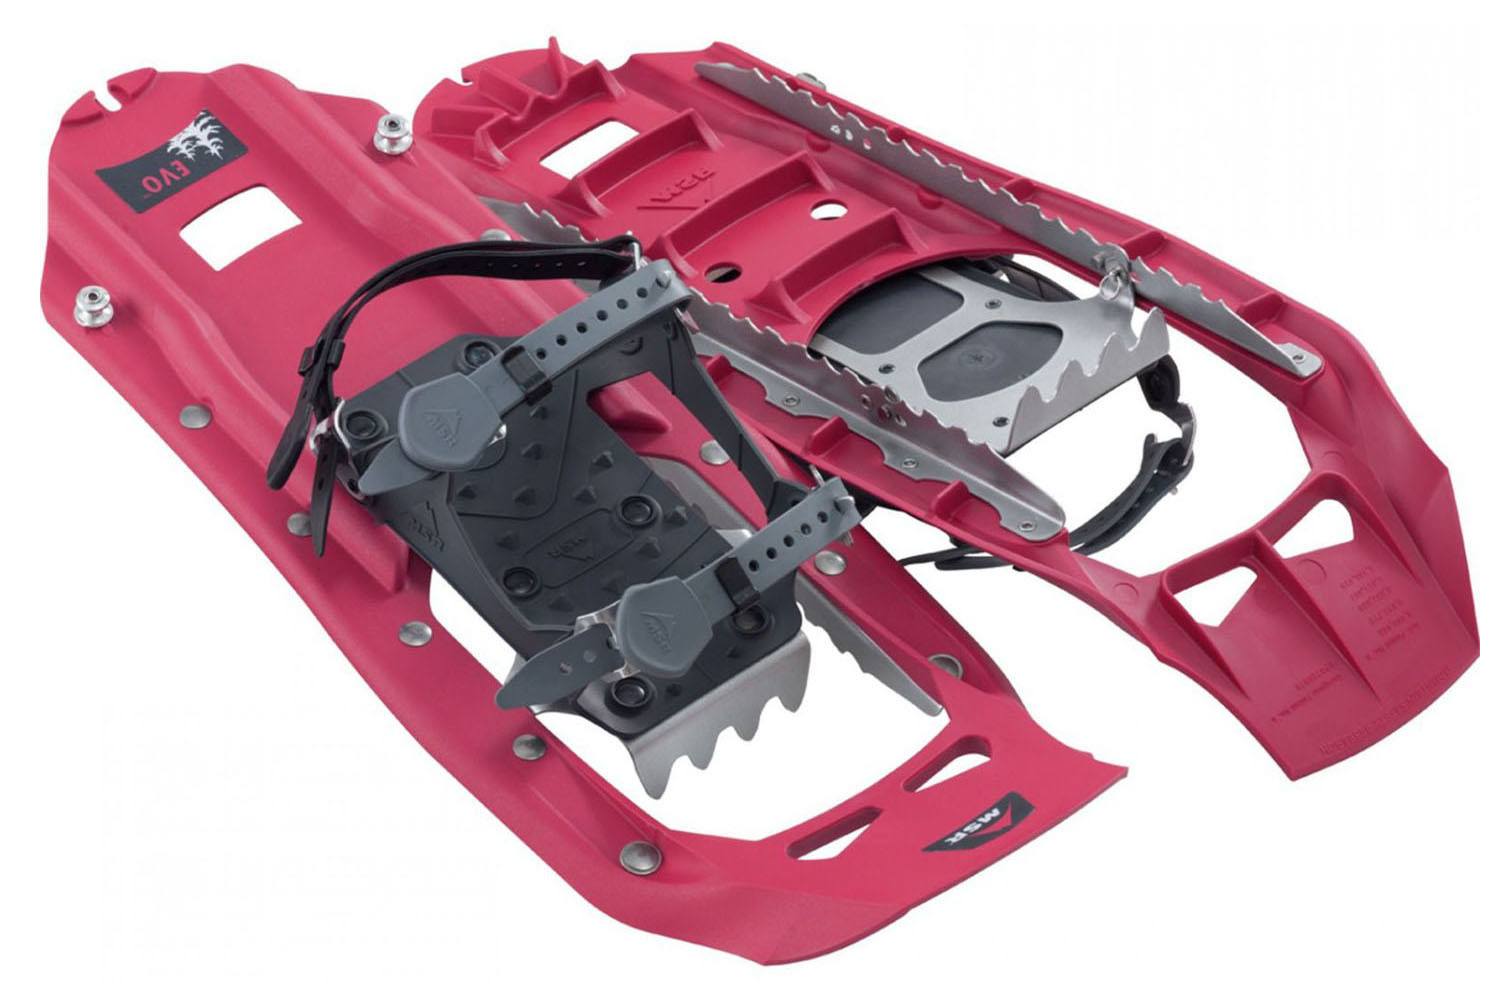 An entry-level snowshoe. Courtesy of Mountain Safety Research